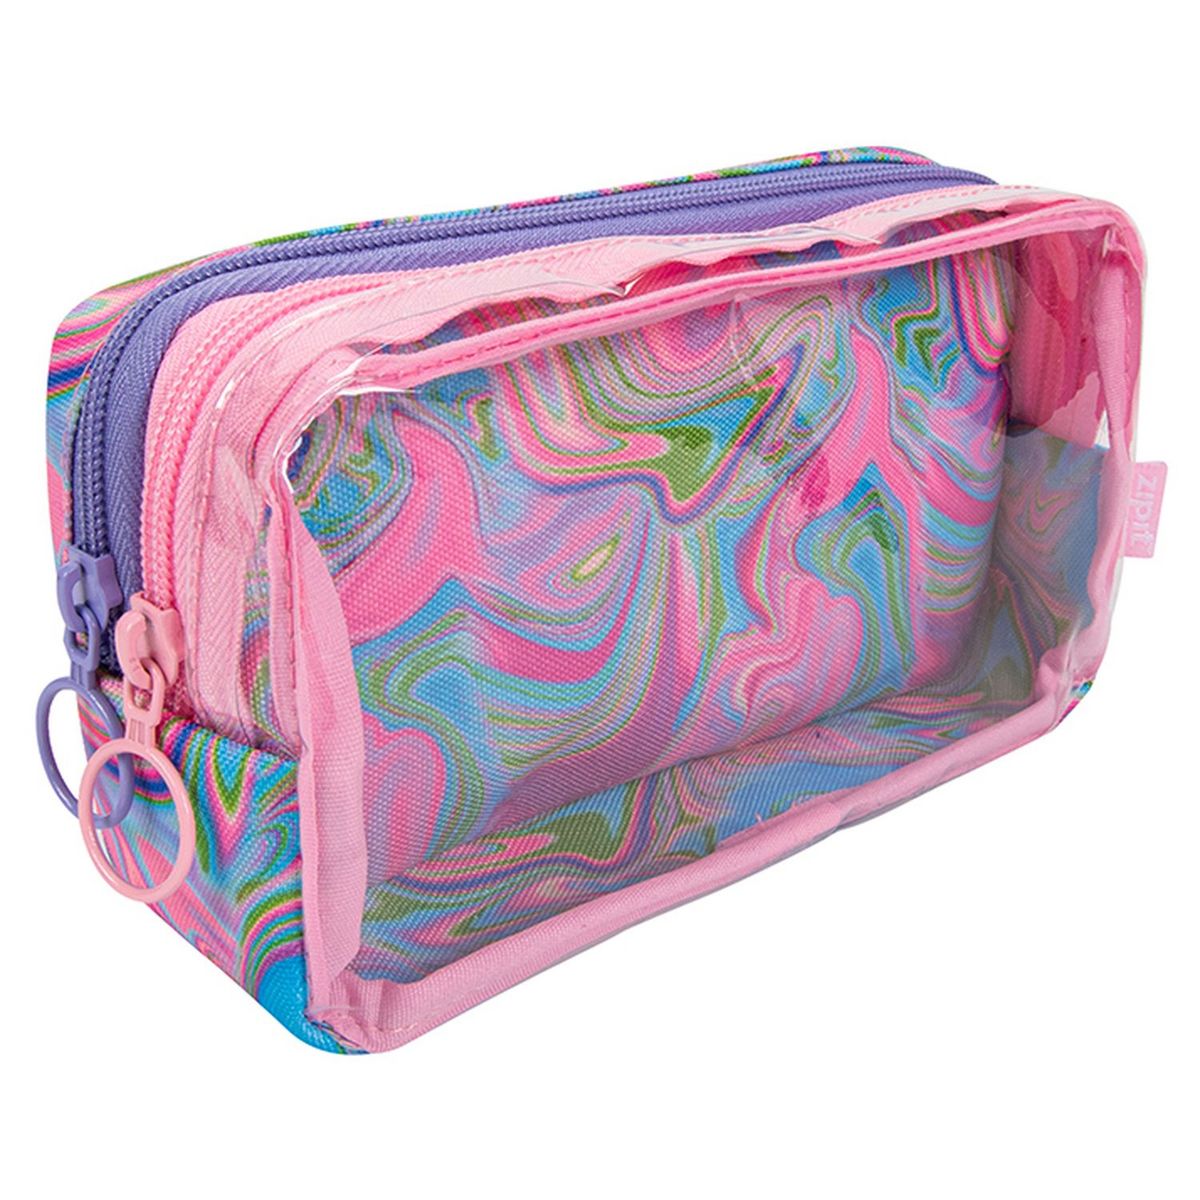 Trousse 2 compartiments rectangle rose transparente TIE AND DIE